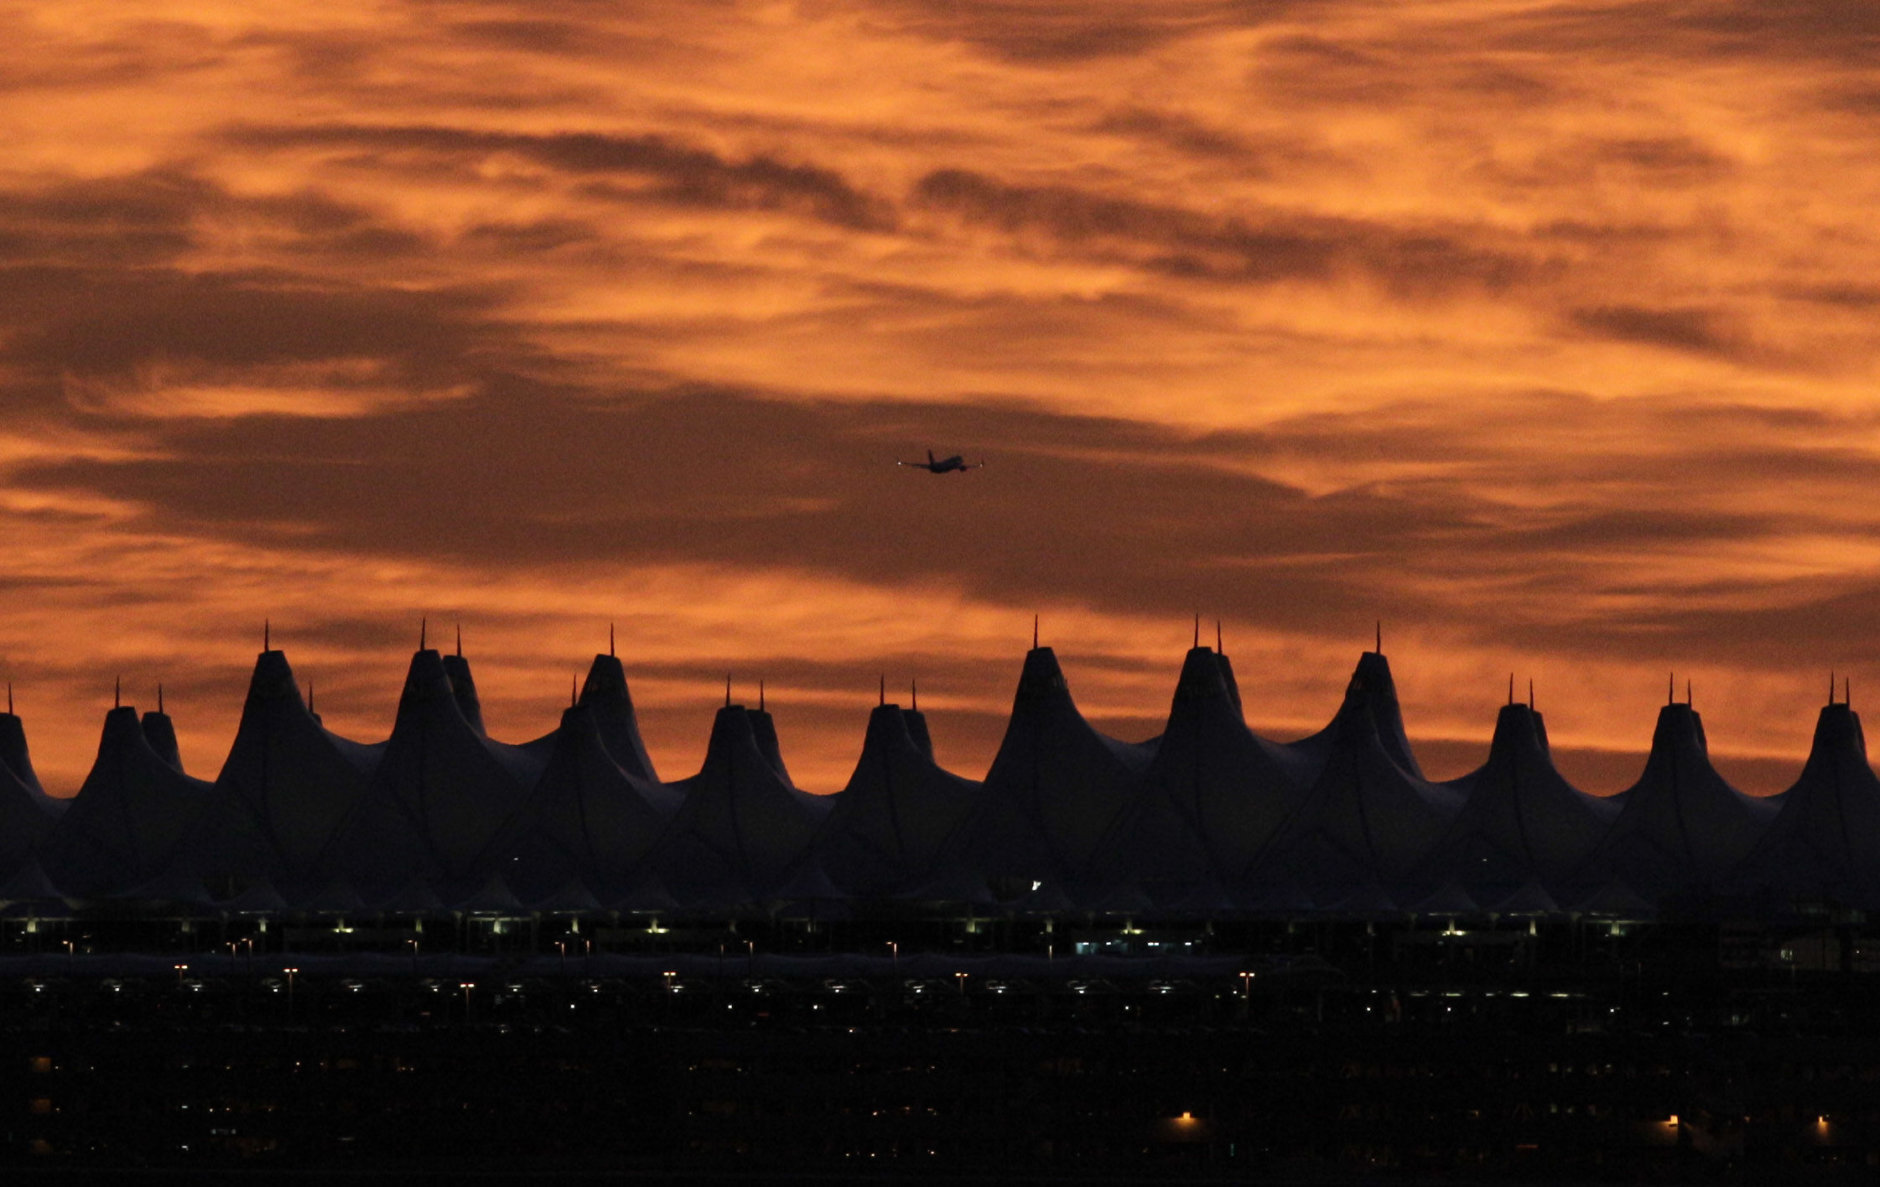 A plane takes off from Denver International Airport early morning as clouds reflect the colors of the sunrise in Denver, Sunday, Sept. 12, 2010. (AP Photo/Jae C. Hong)